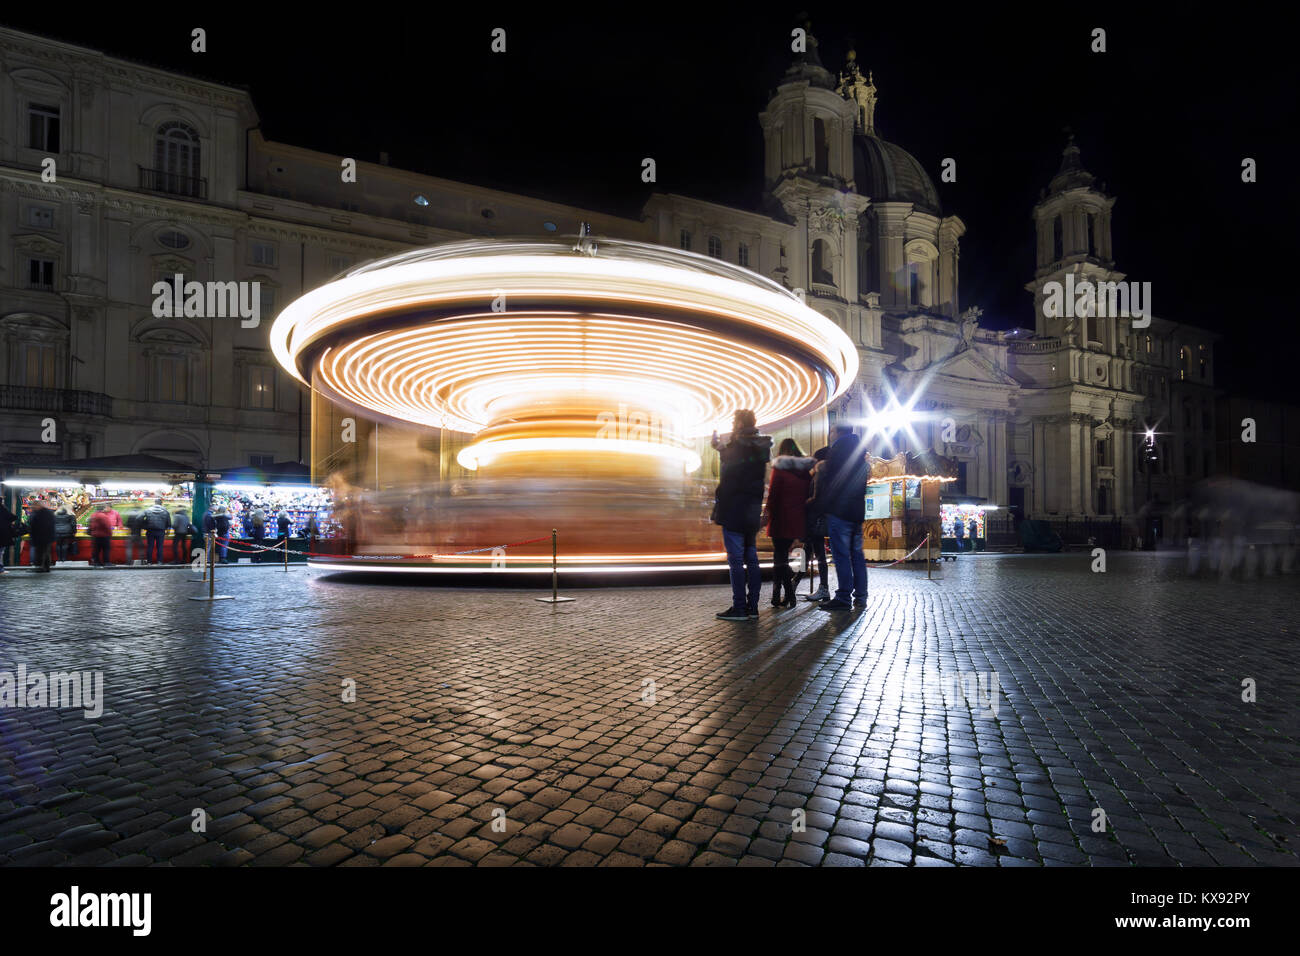 Rome, Italy - December 23, 2017: The rotating carousel with horses, in Piazza Navona. In the background the Church of Sant'Agnese in Agone. Night phot Stock Photo